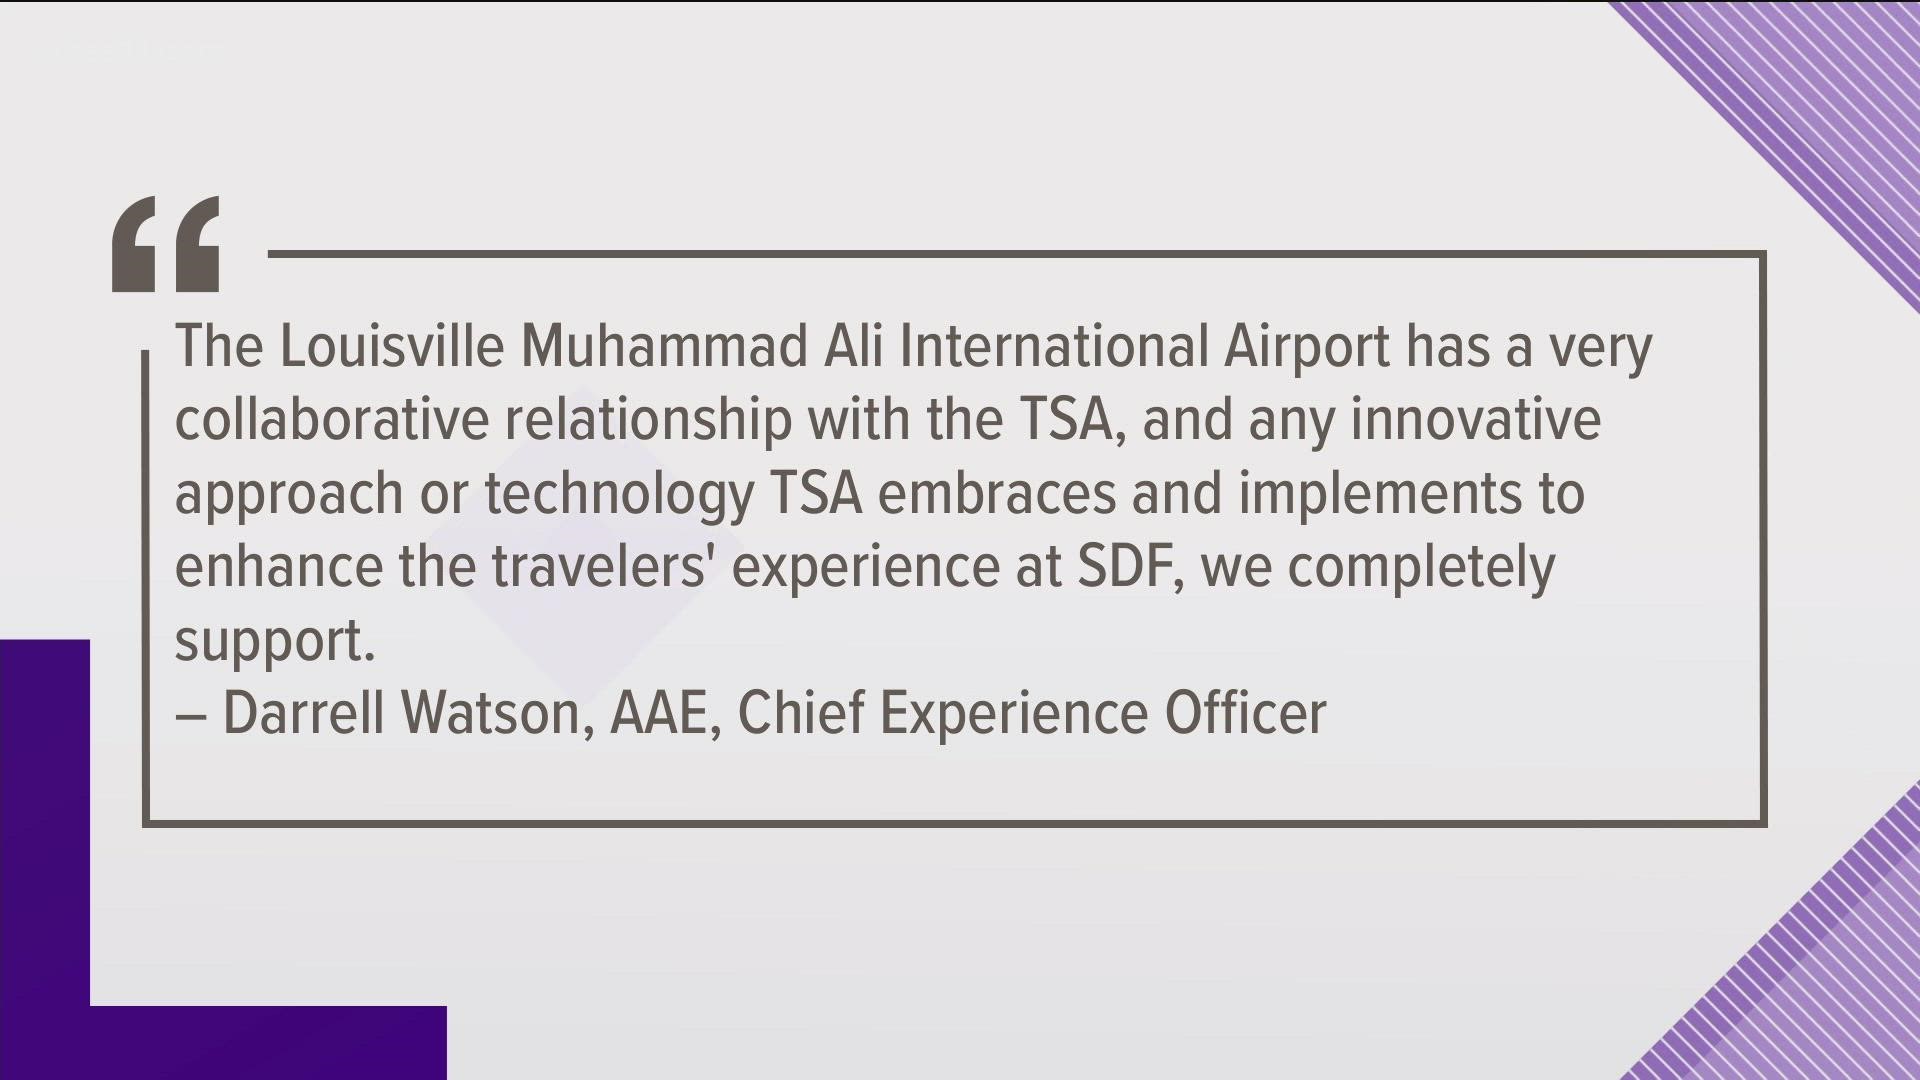 As more businesses allow you to have digital identification, airports say they're open to the idea.